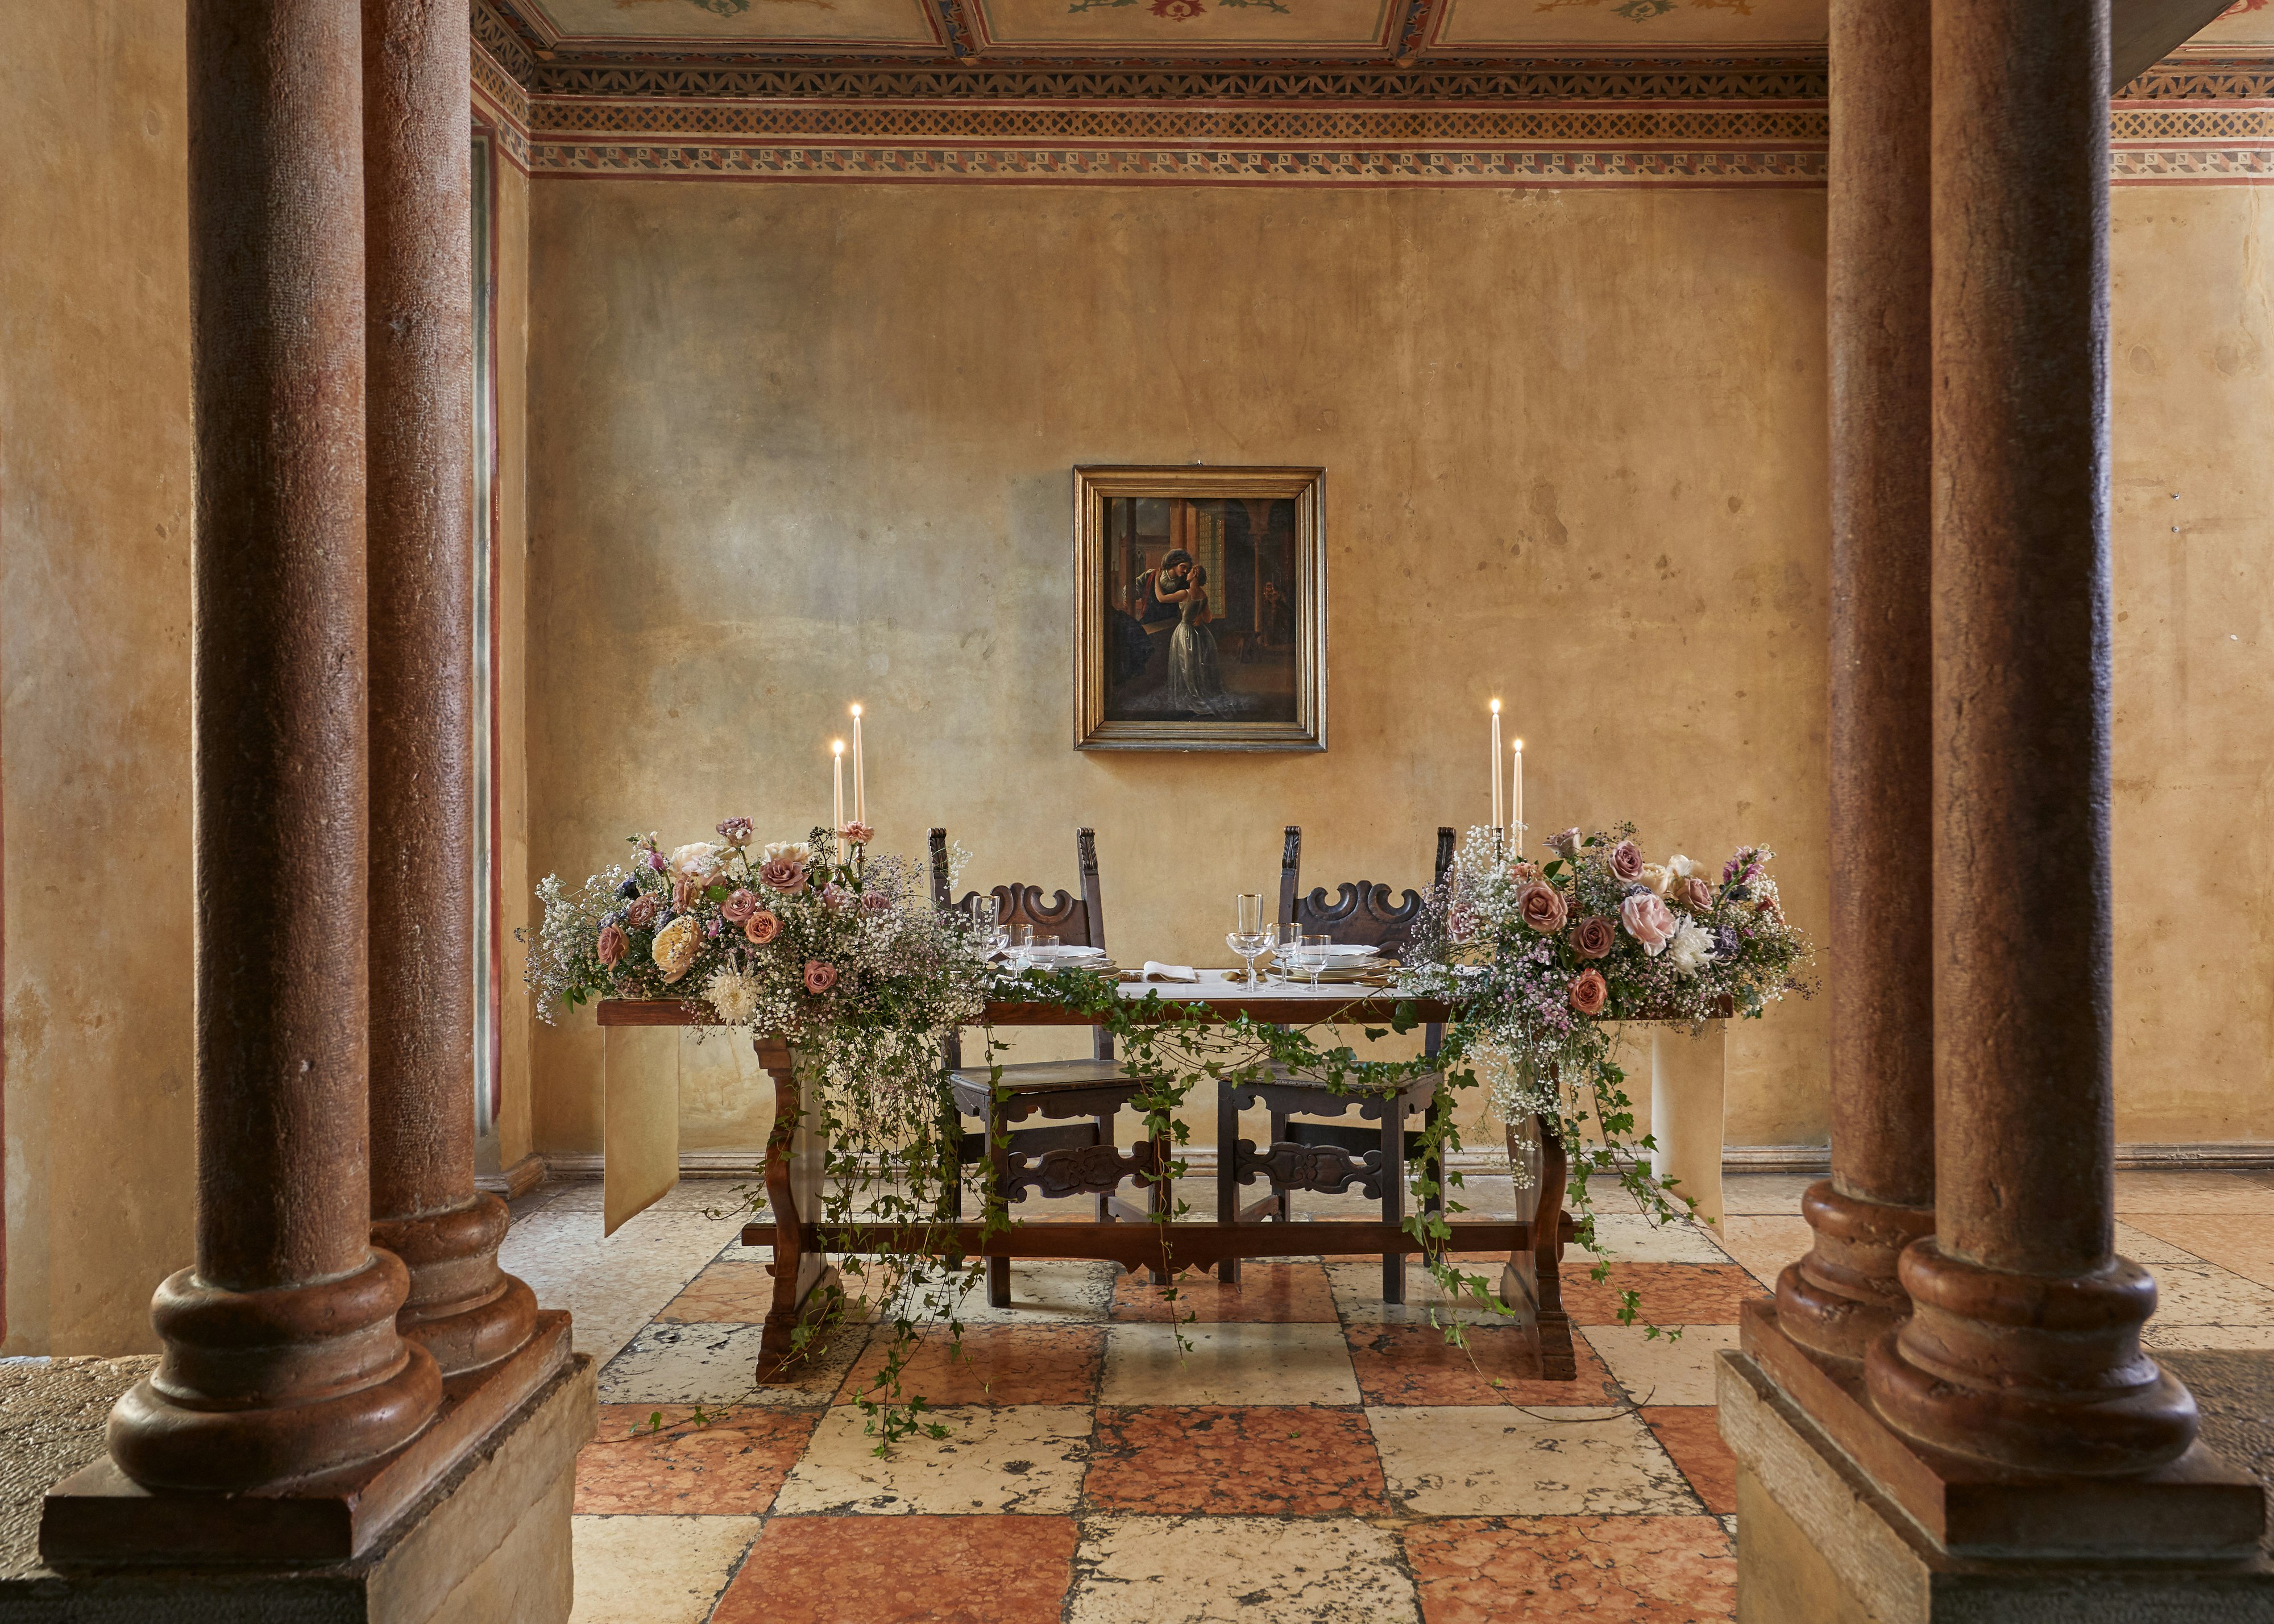 A dining table set with candles and and flowers, placed between columns on a checkerboard-tiled floor